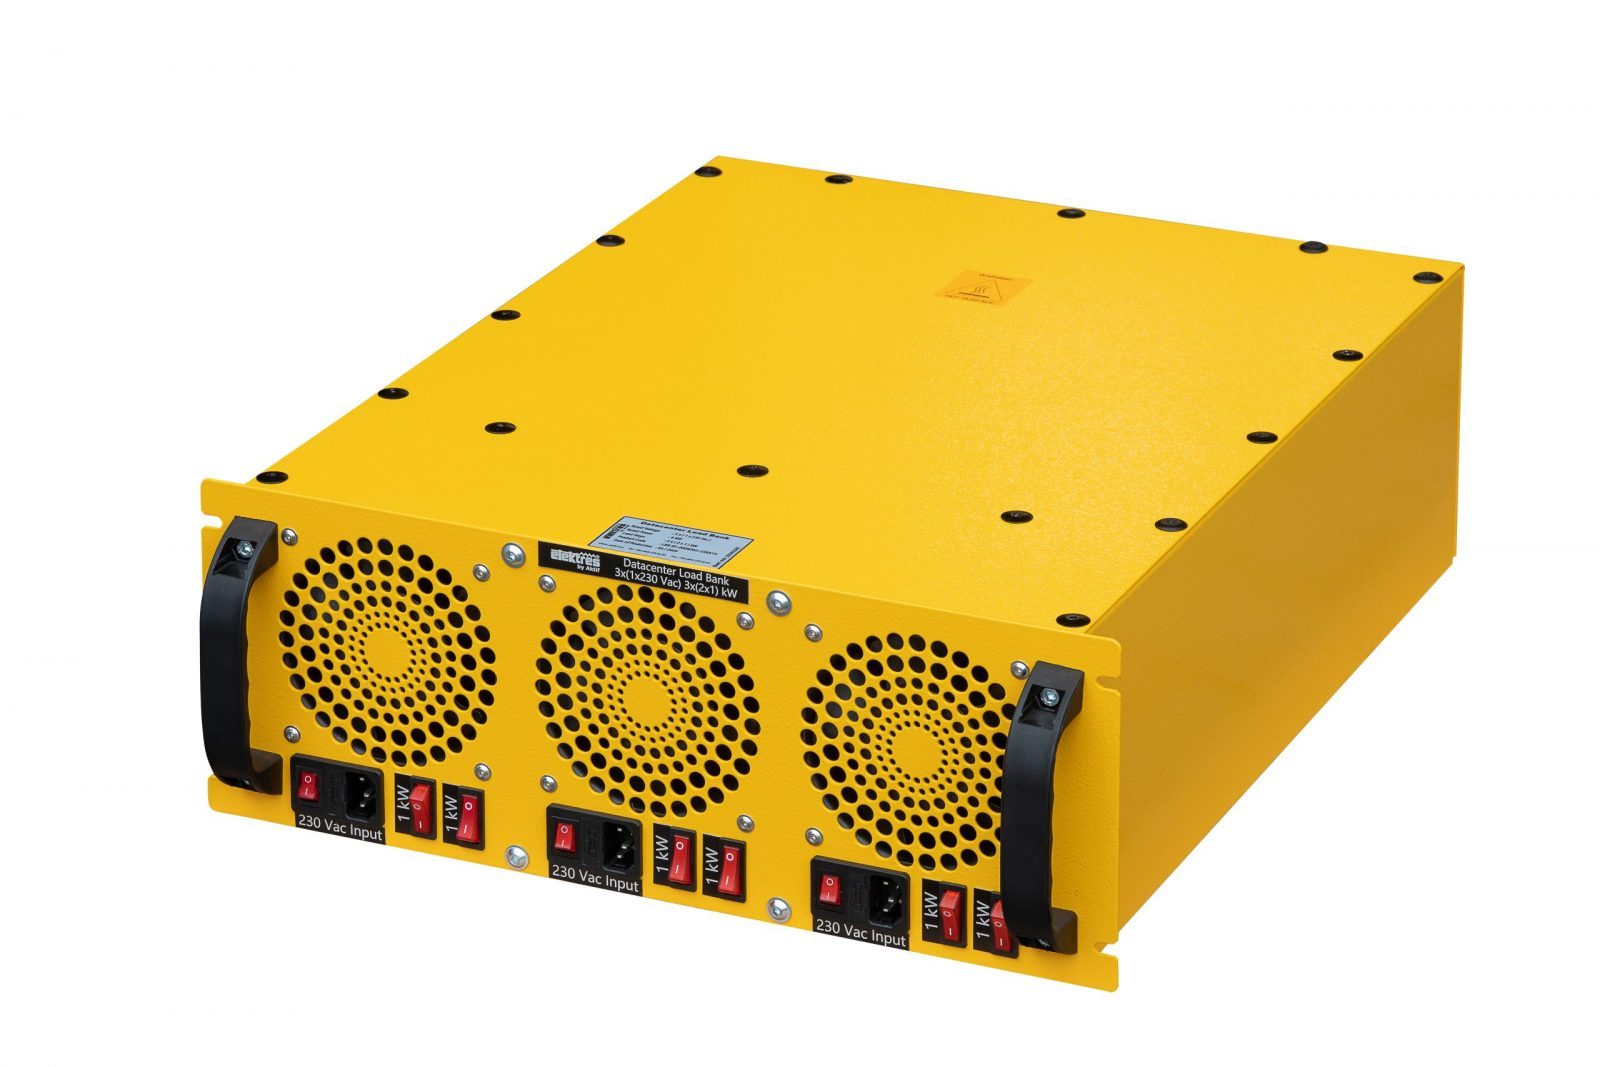 19″ Rack Mounted Load Banks (for Data Centers)